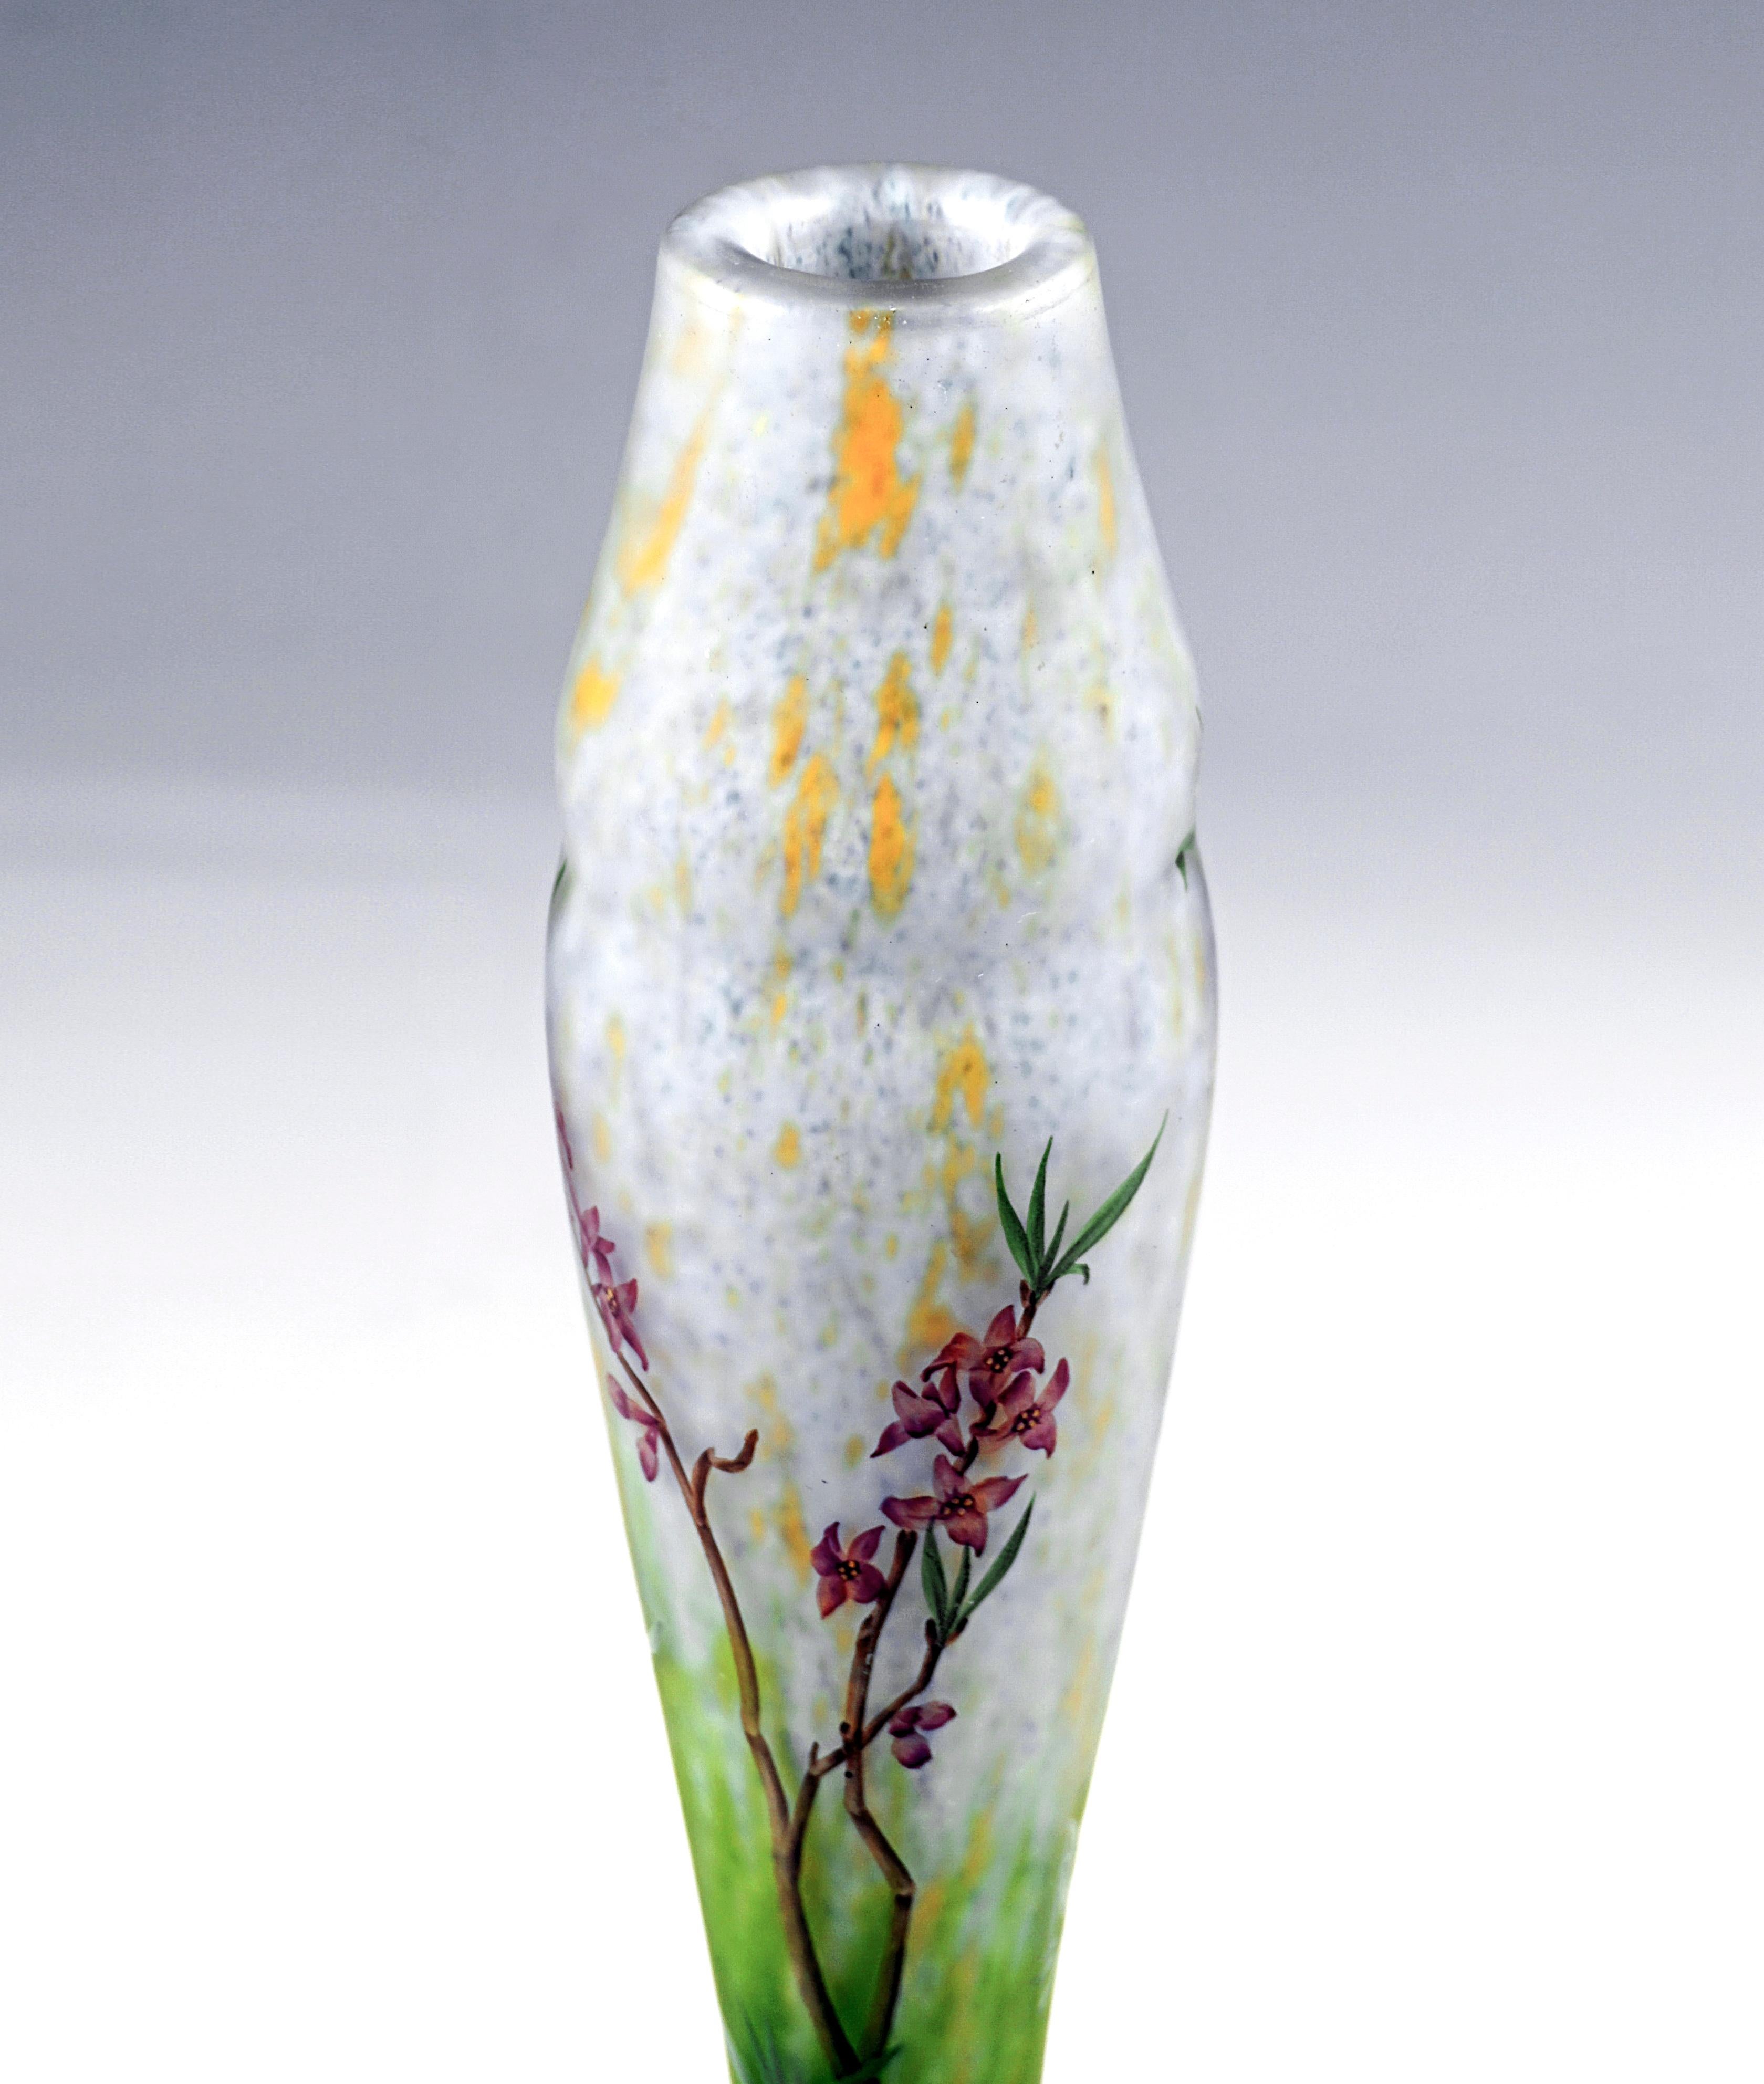 Art Nouveau Vase with Delicate Flower Branches Decor, Daum Nancy, France, c 1910 In Good Condition For Sale In Vienna, AT